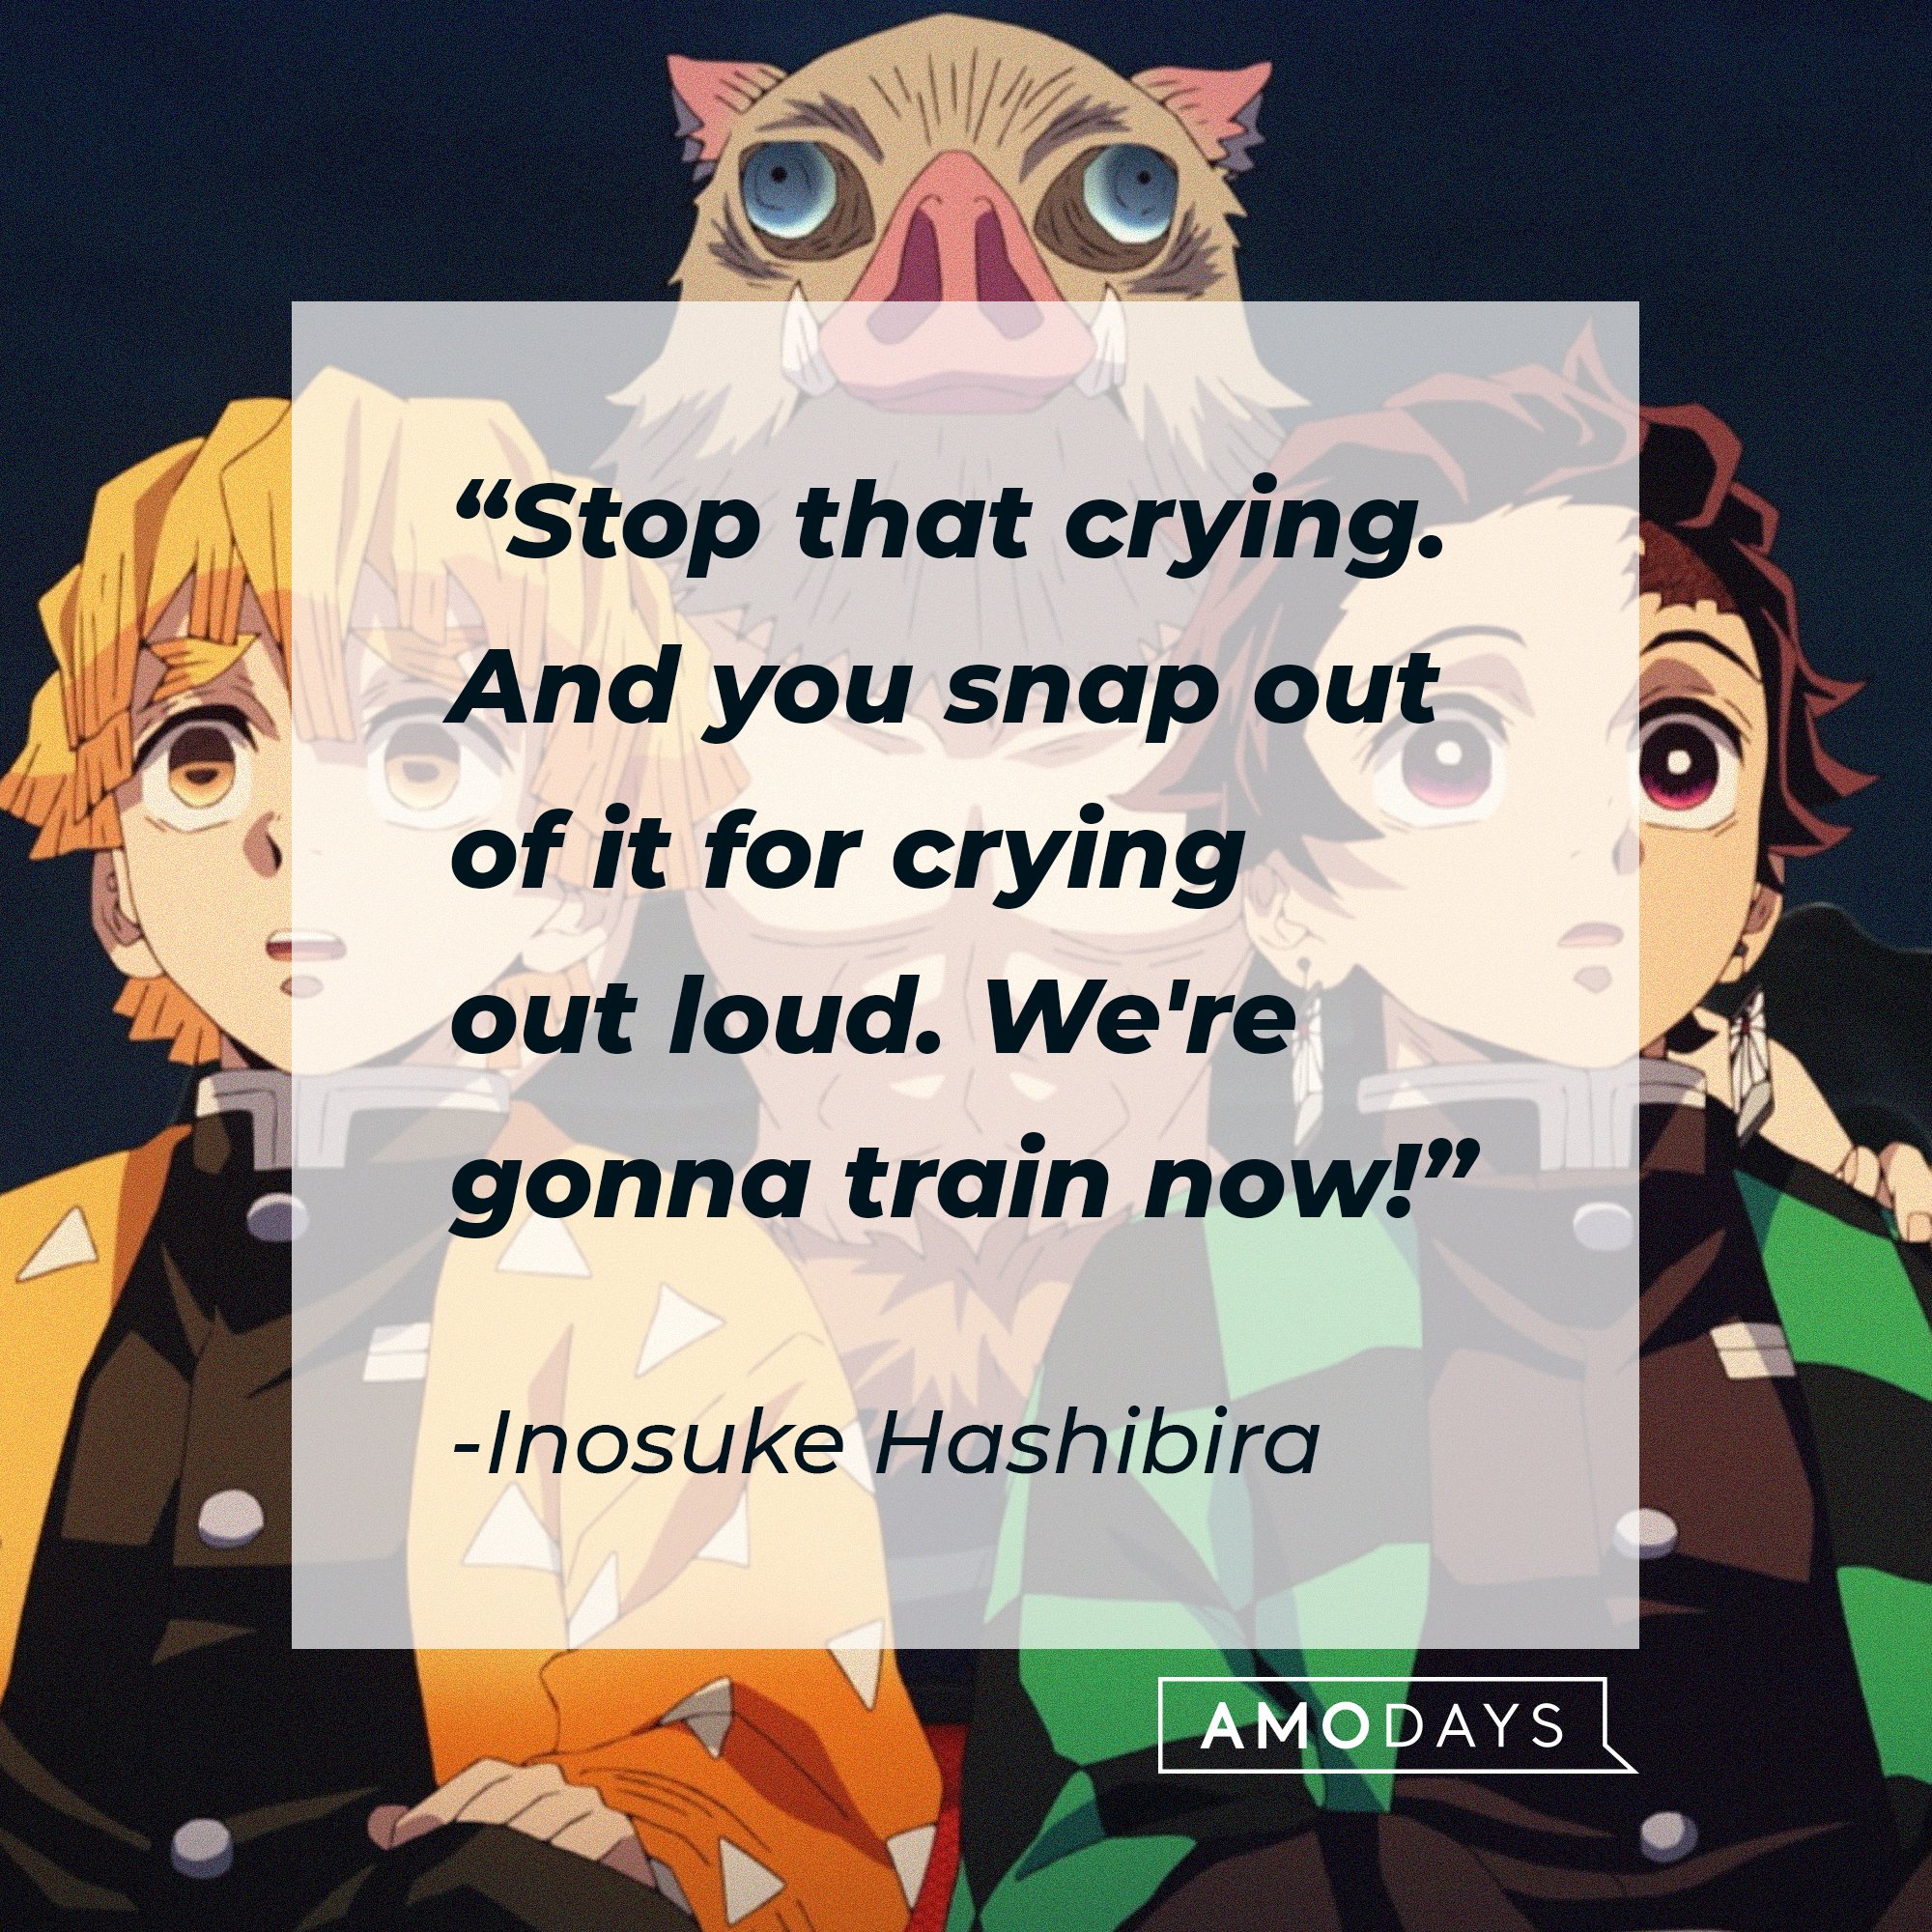 Inosuke Hashibira’s quote: "Stop that crying. And you snap out of it, for crying out loud. We're gonna train now!" | Image: AmoDays